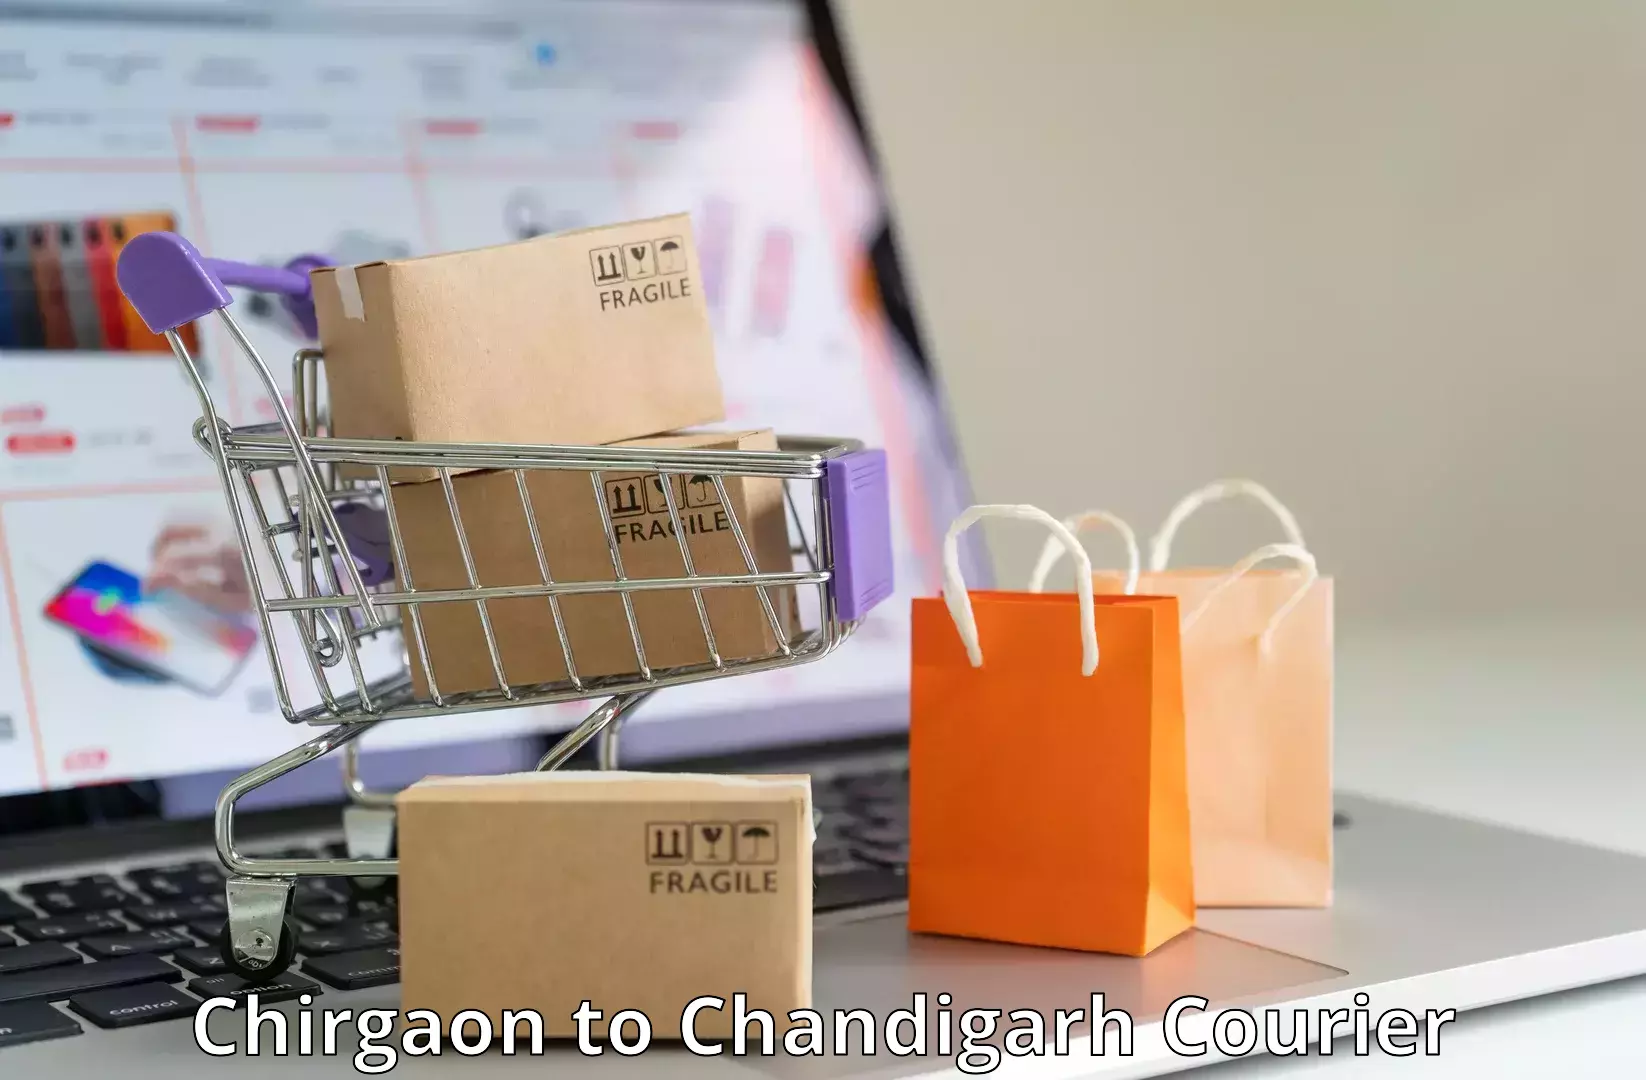 Cash on delivery service Chirgaon to Panjab University Chandigarh